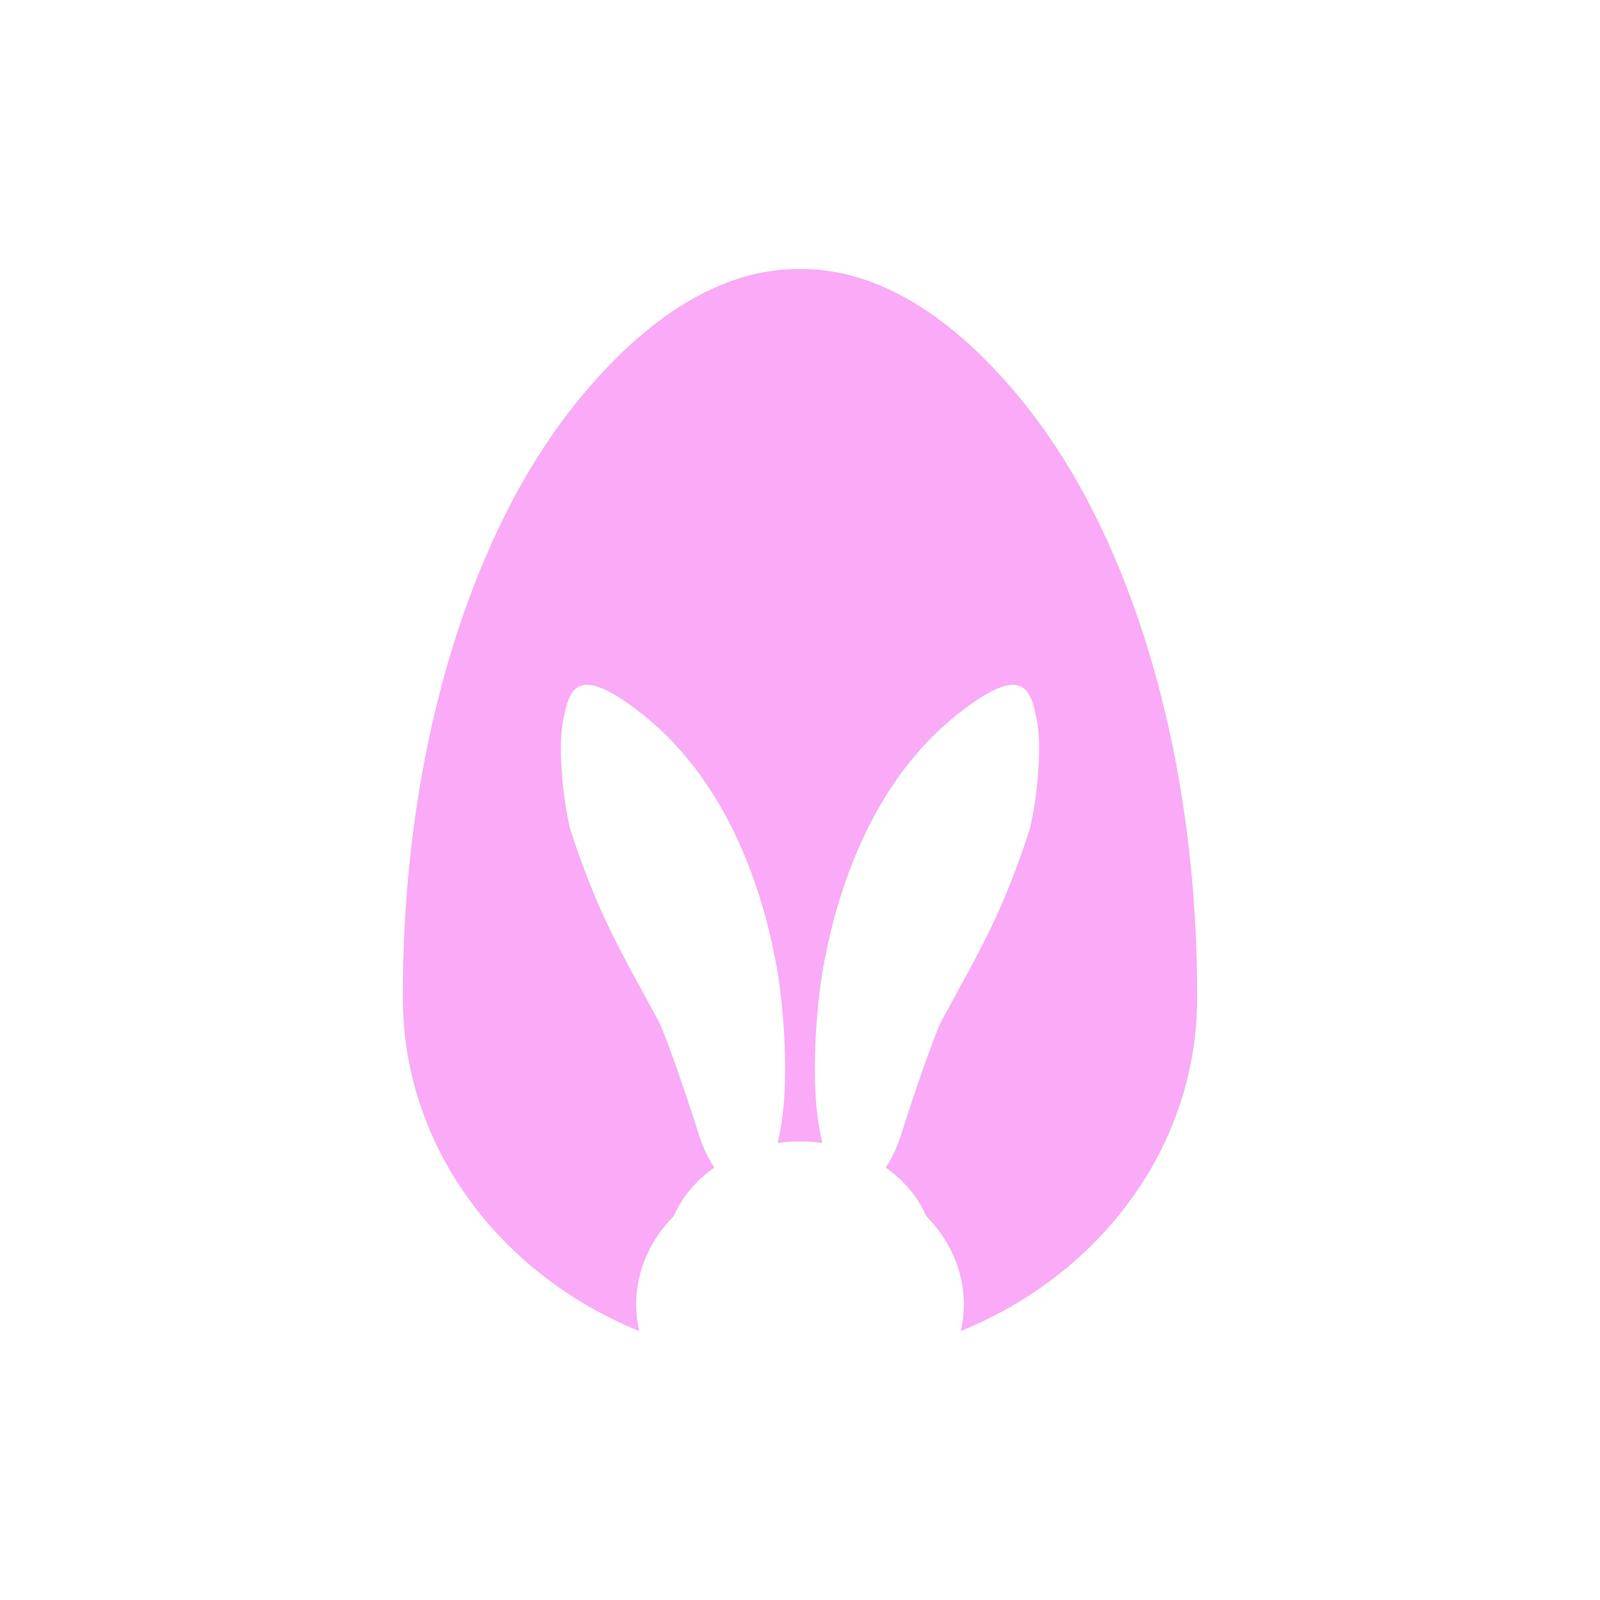 Easter egg shape with bunny ears silhouette on white background - traditional symbol of holiday. Simple eggs hunt - vector illustration. Minimalistic design for card, banner or poster.